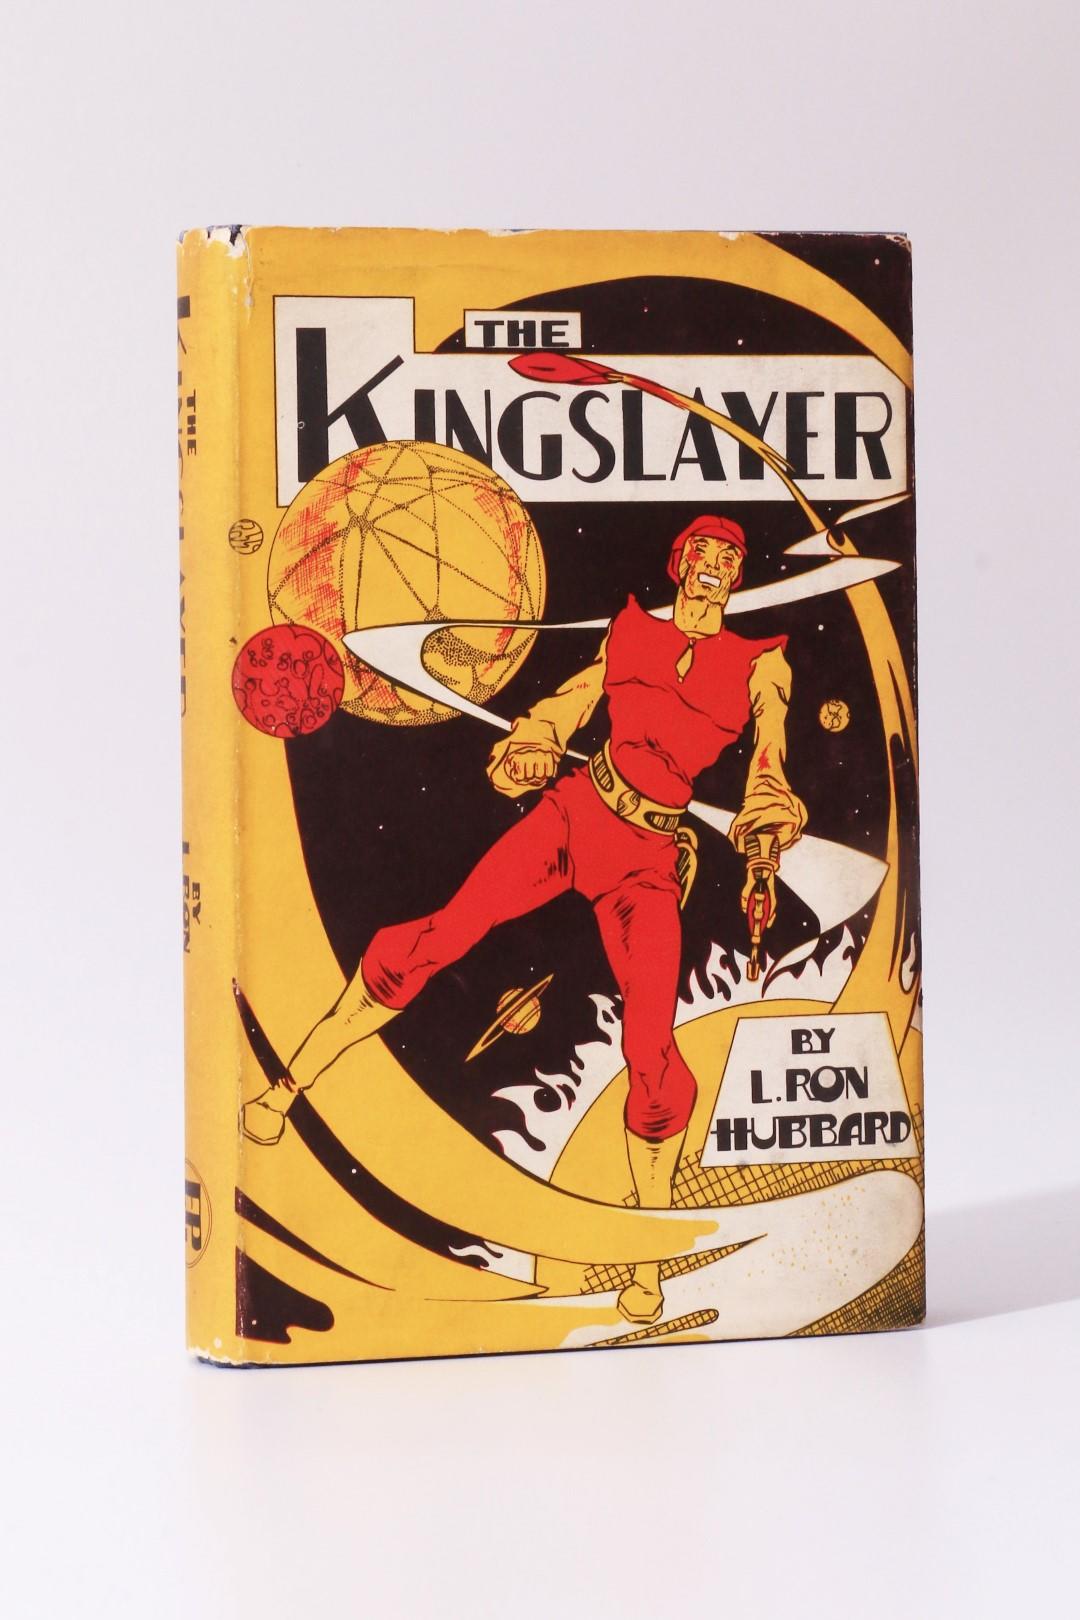 L. Ron Hubbard - The Kingslayer - Fantasy Publishing [FPCI], 1949, First Edition.